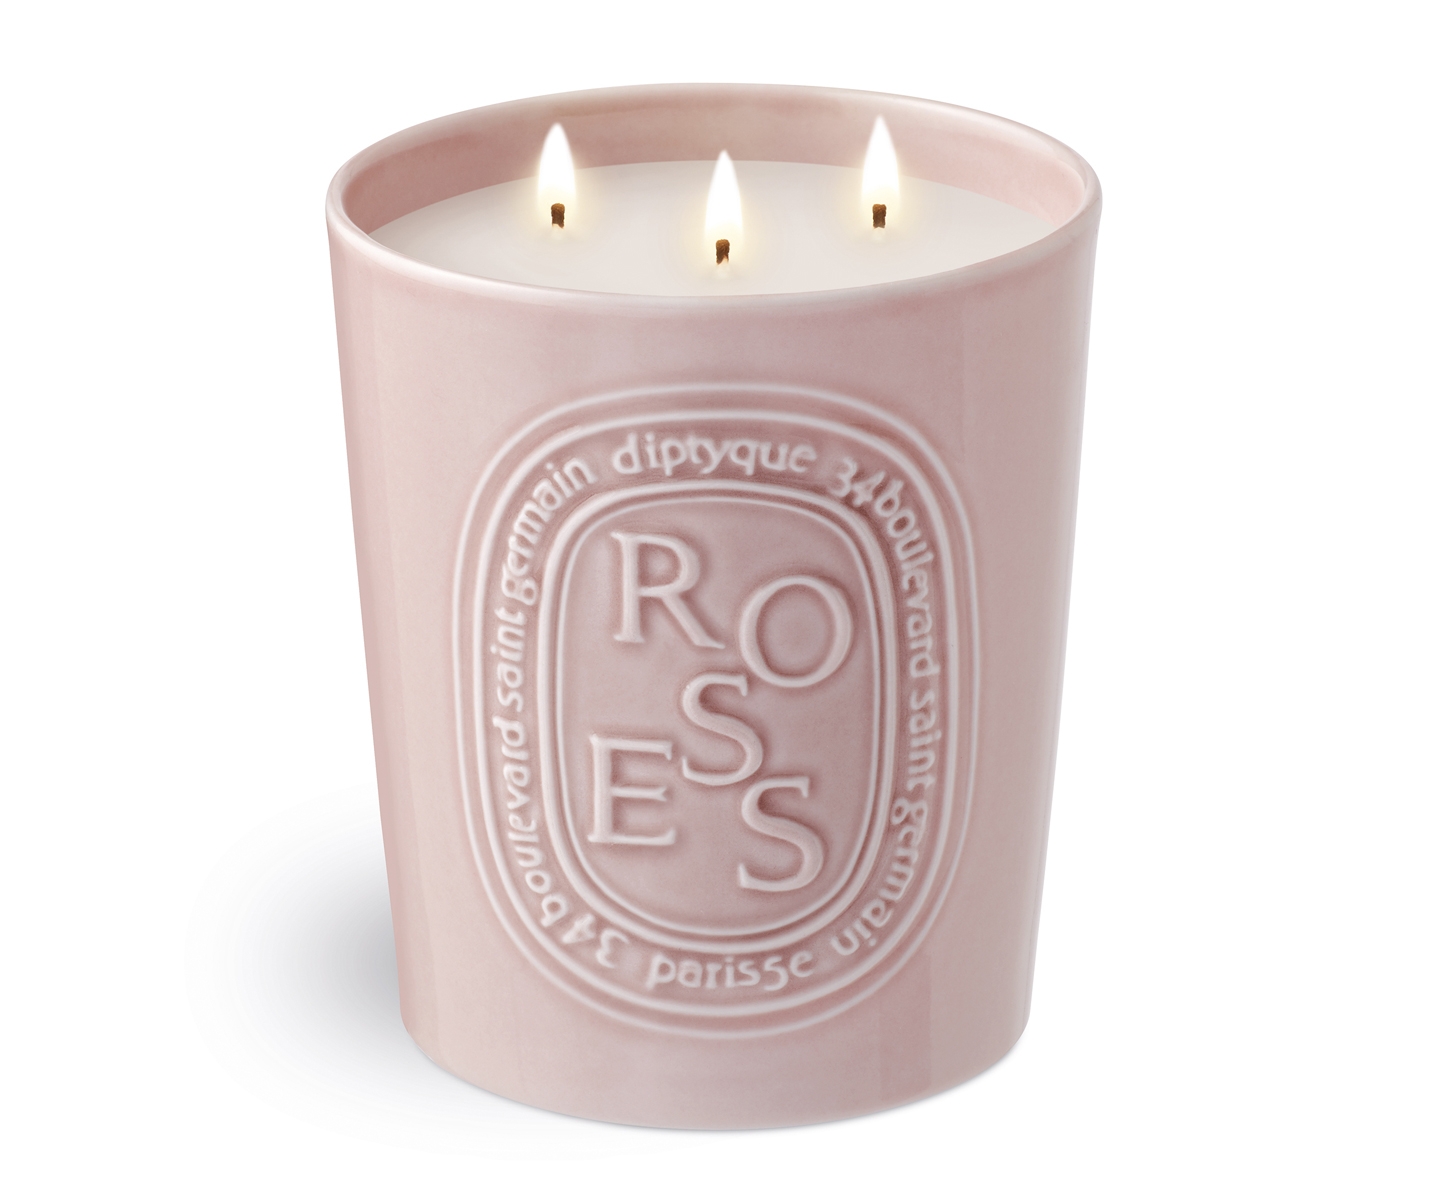 Roses - Large candle